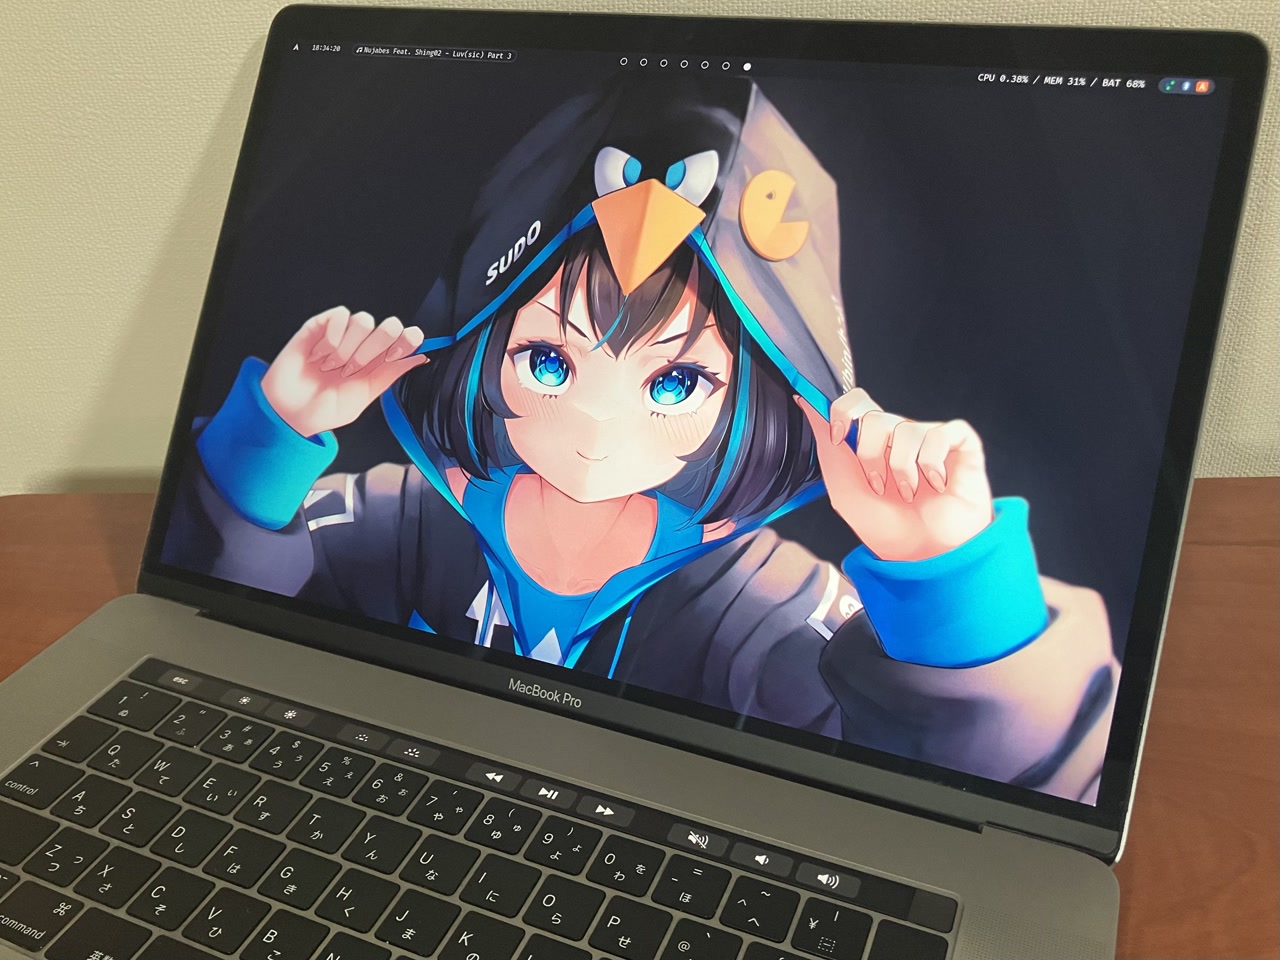 Running Arch Linux on MacBook Pro 15,1